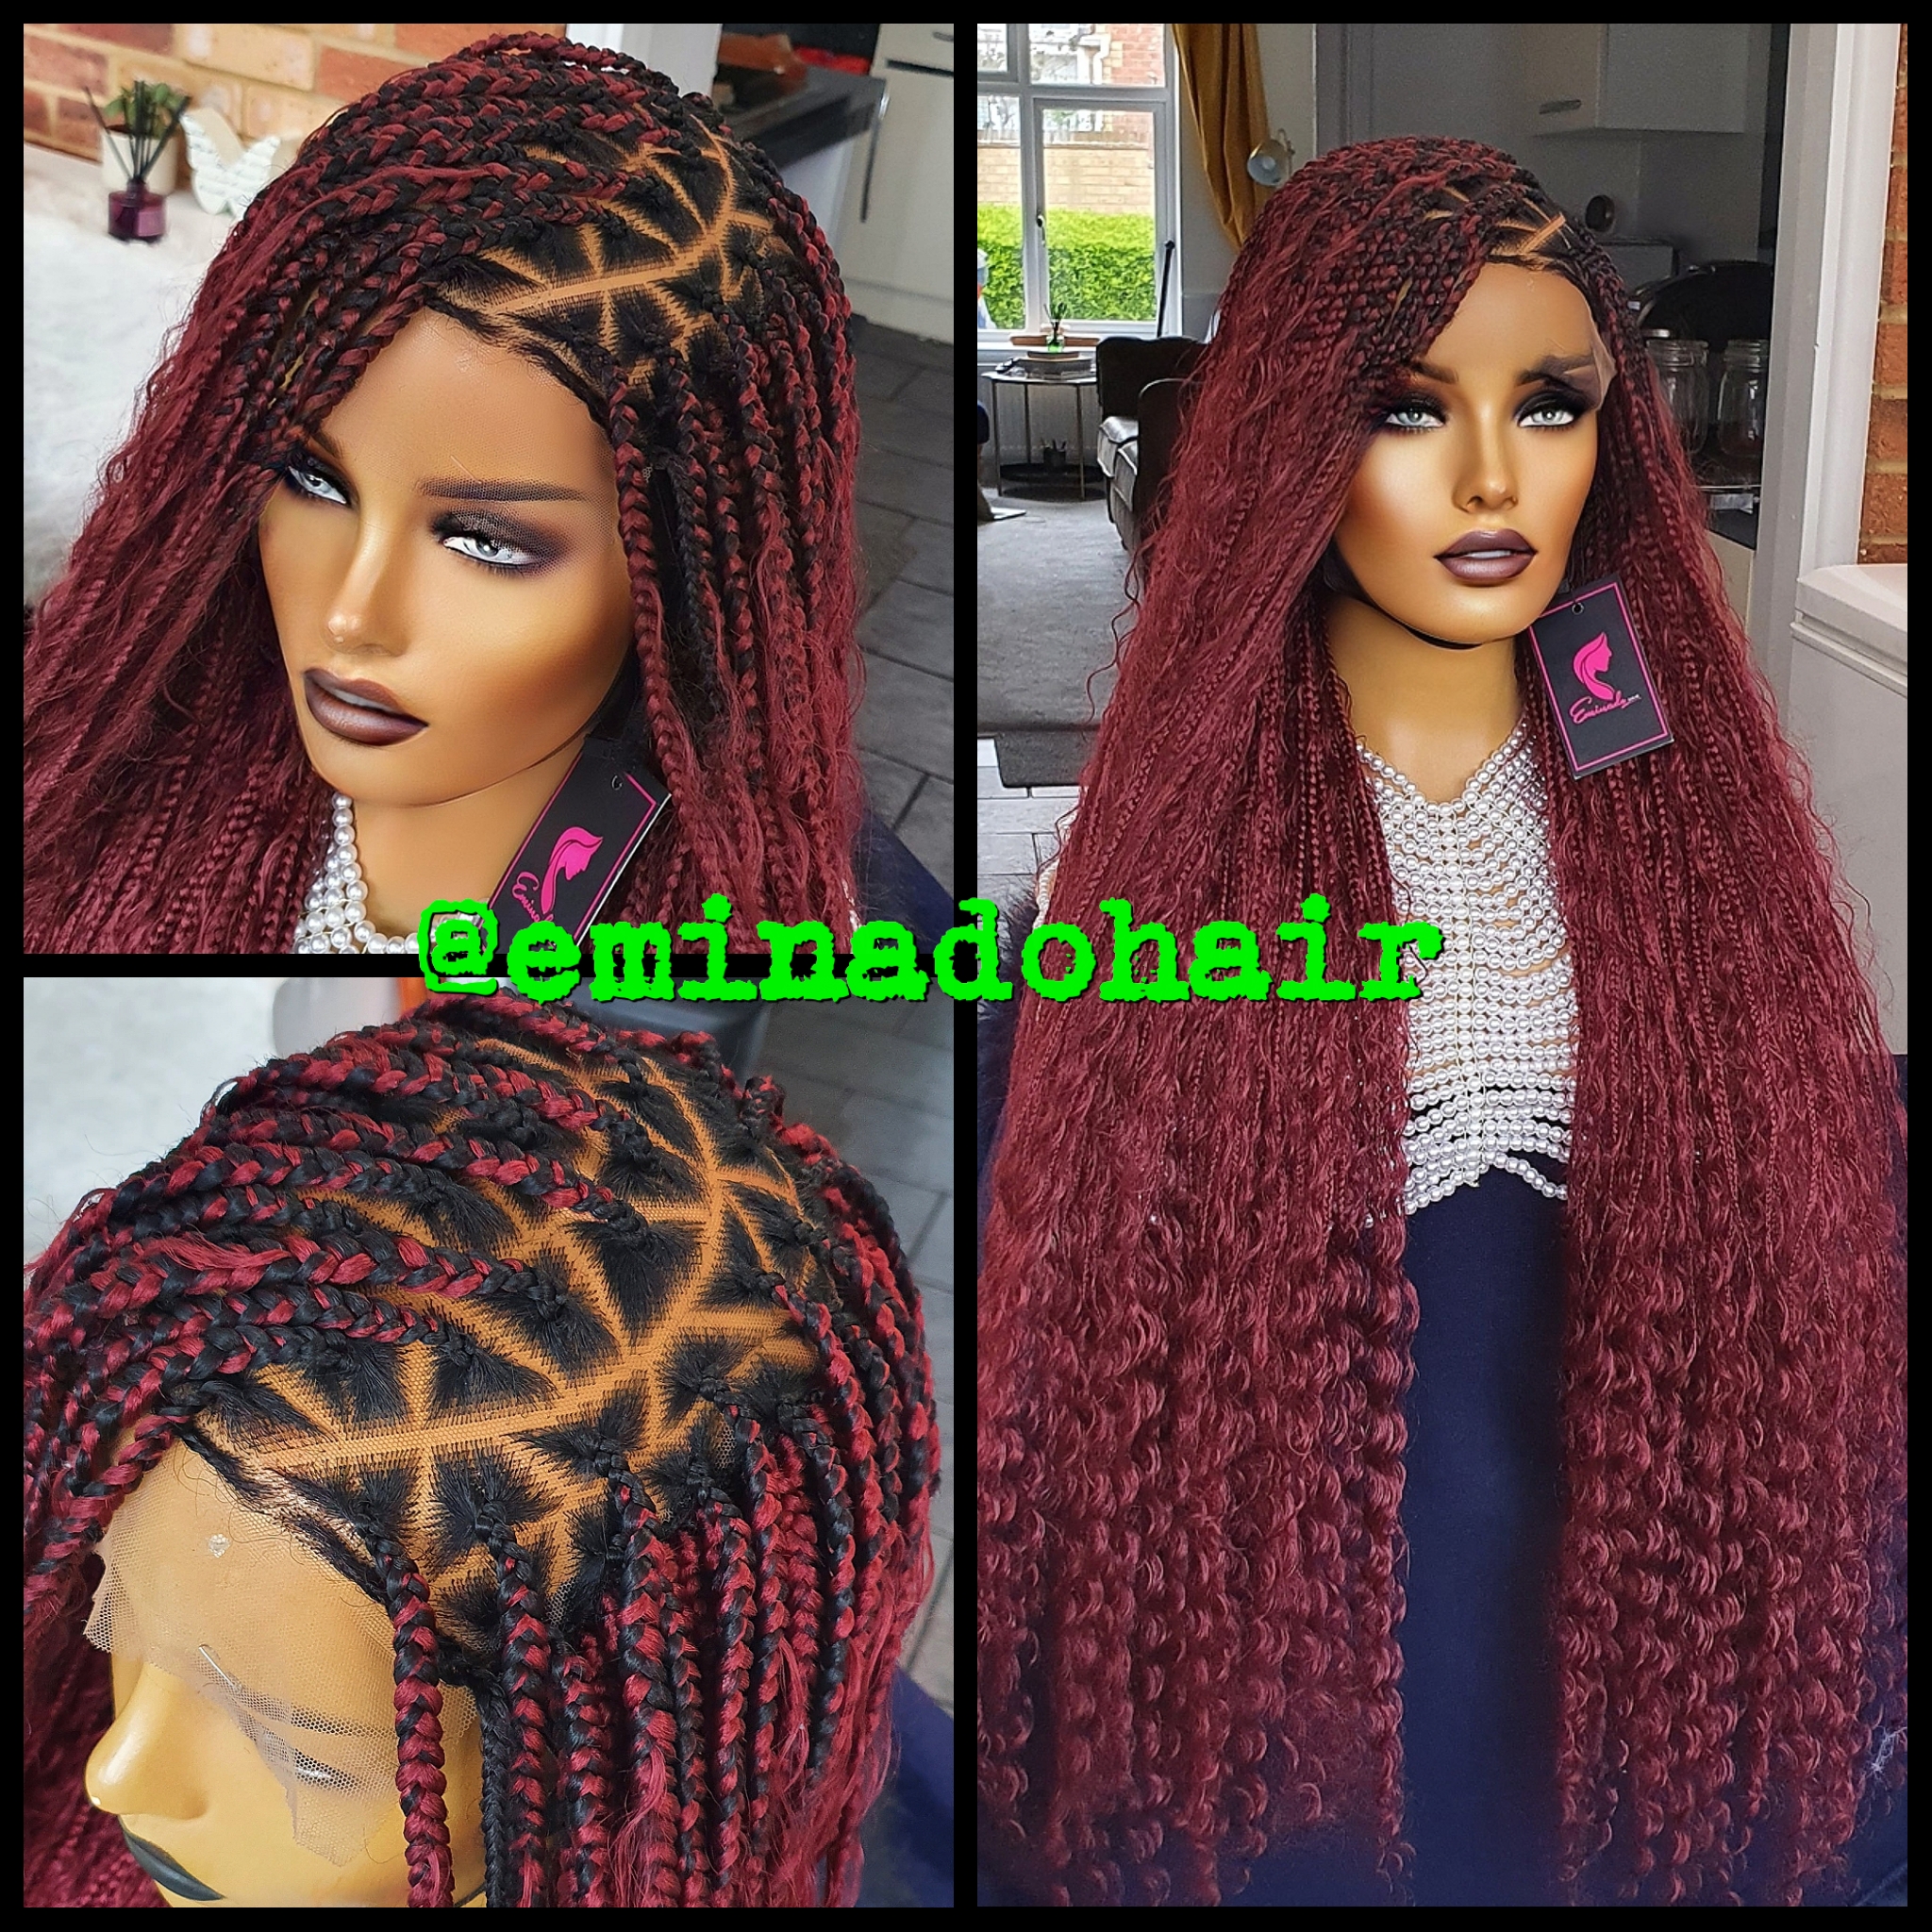 Burgundy Curved Boho Triangle knotless braids, Full Frontal and full lace  option (Copy), Braided Wigs Store UK, Eminado Braided Wigs, Braid Wig,  Lace frontal, Full lace, Cornrow, Locs, Twists